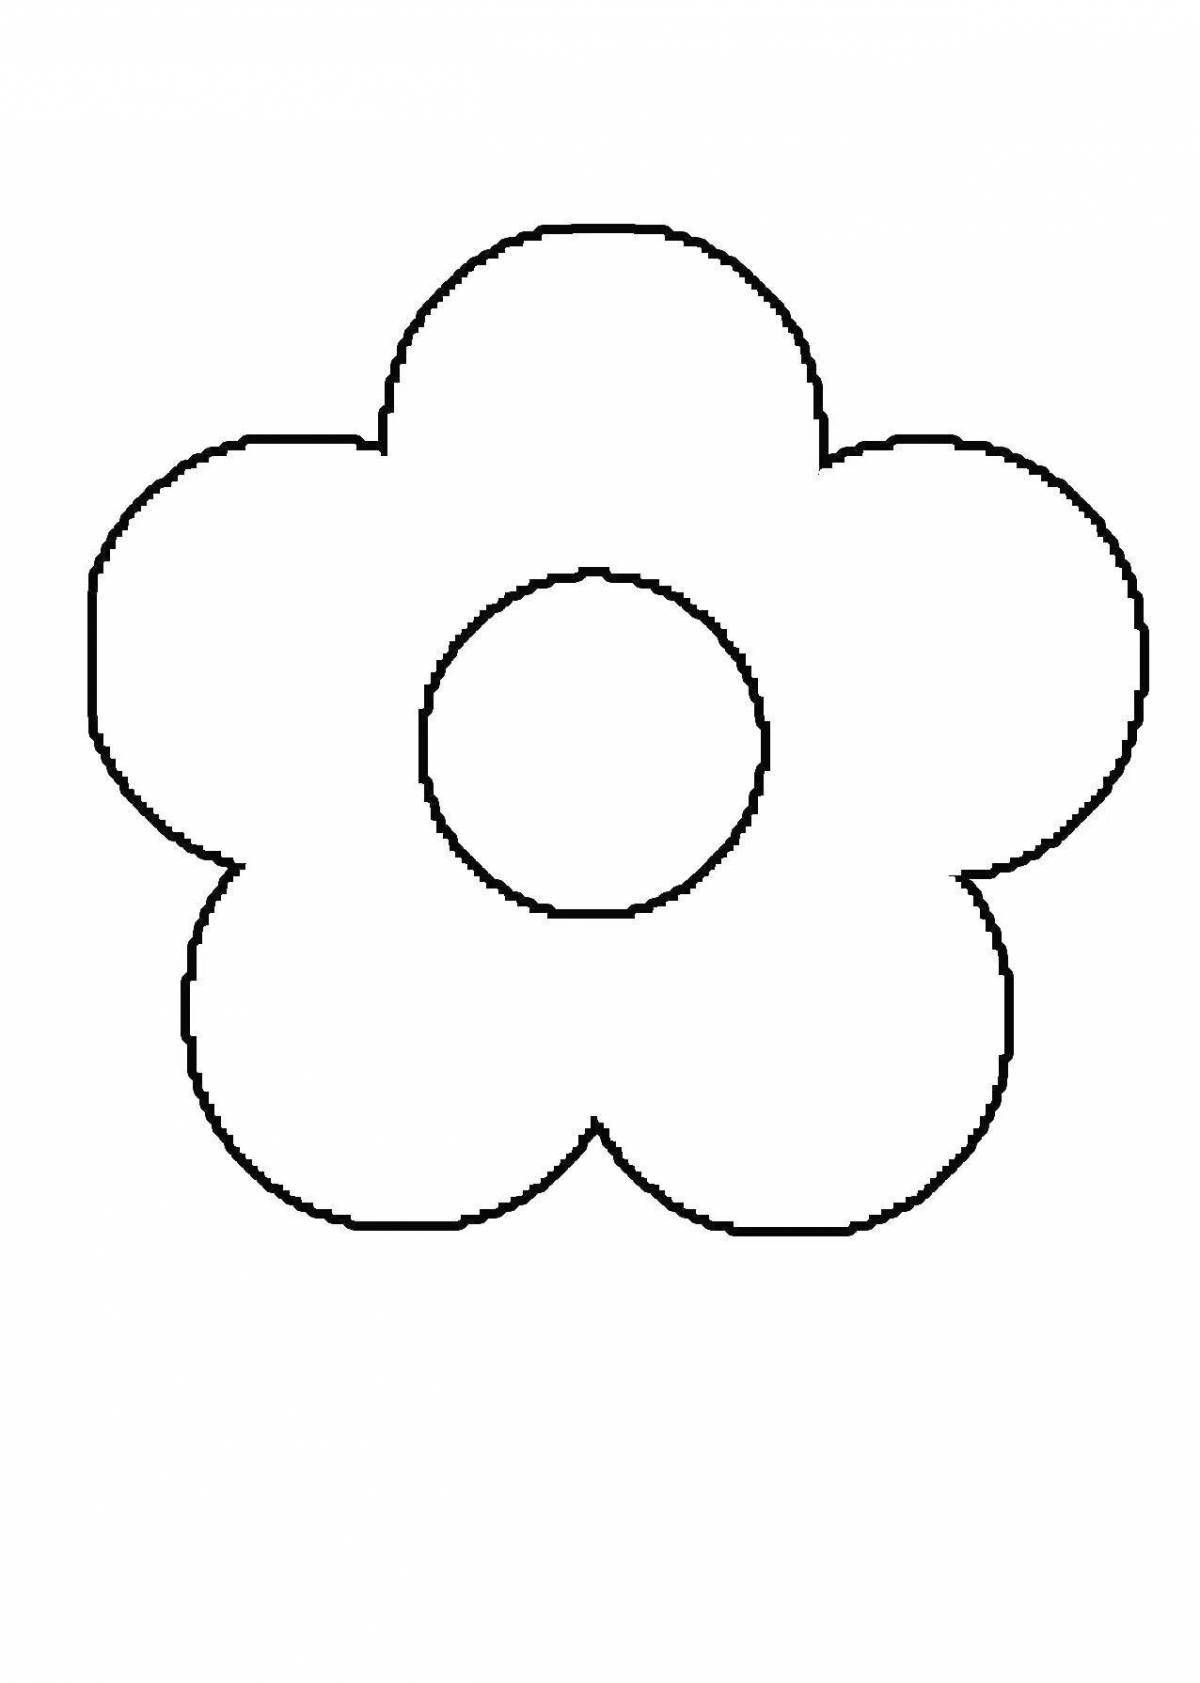 Coloring page delightful flower pattern